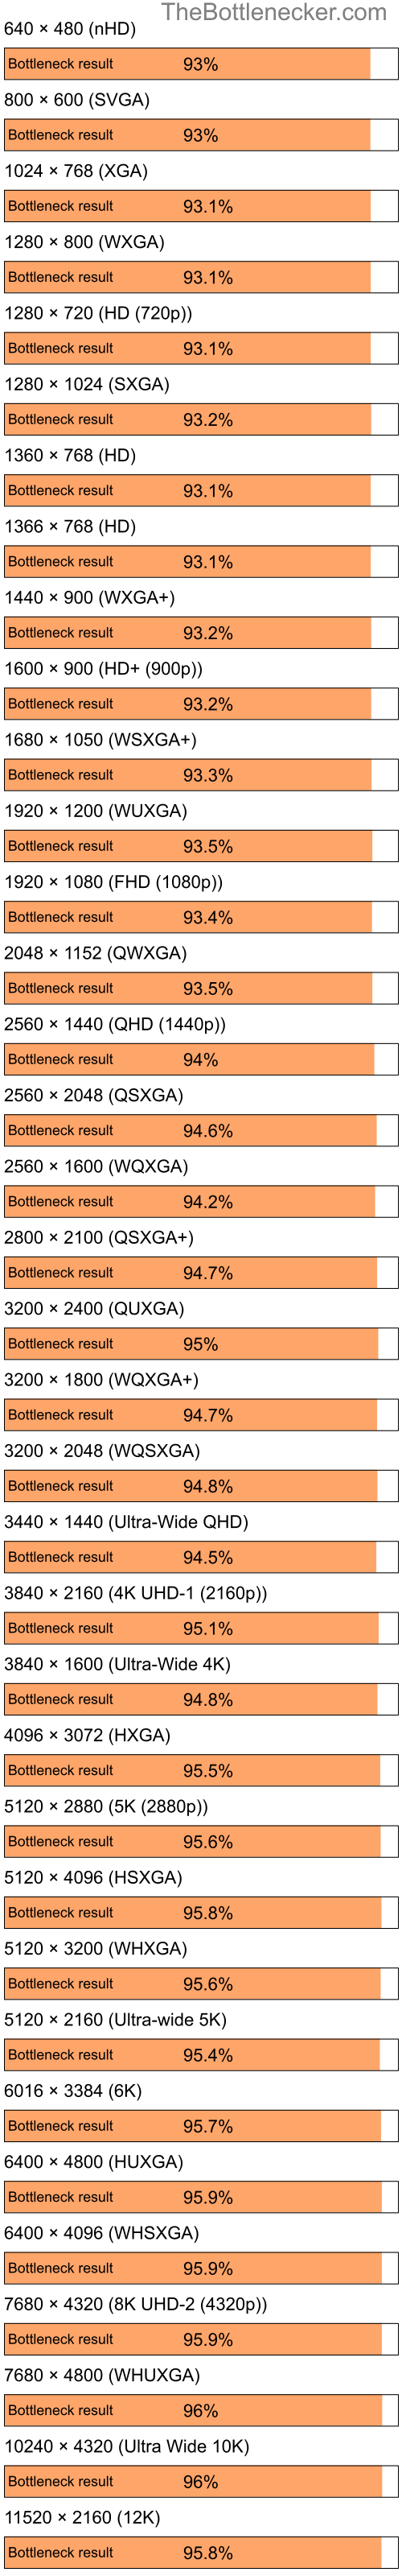 Bottleneck results by resolution for Intel Atom Z520 and AMD Radeon 7000 in Graphic Card Intense Tasks